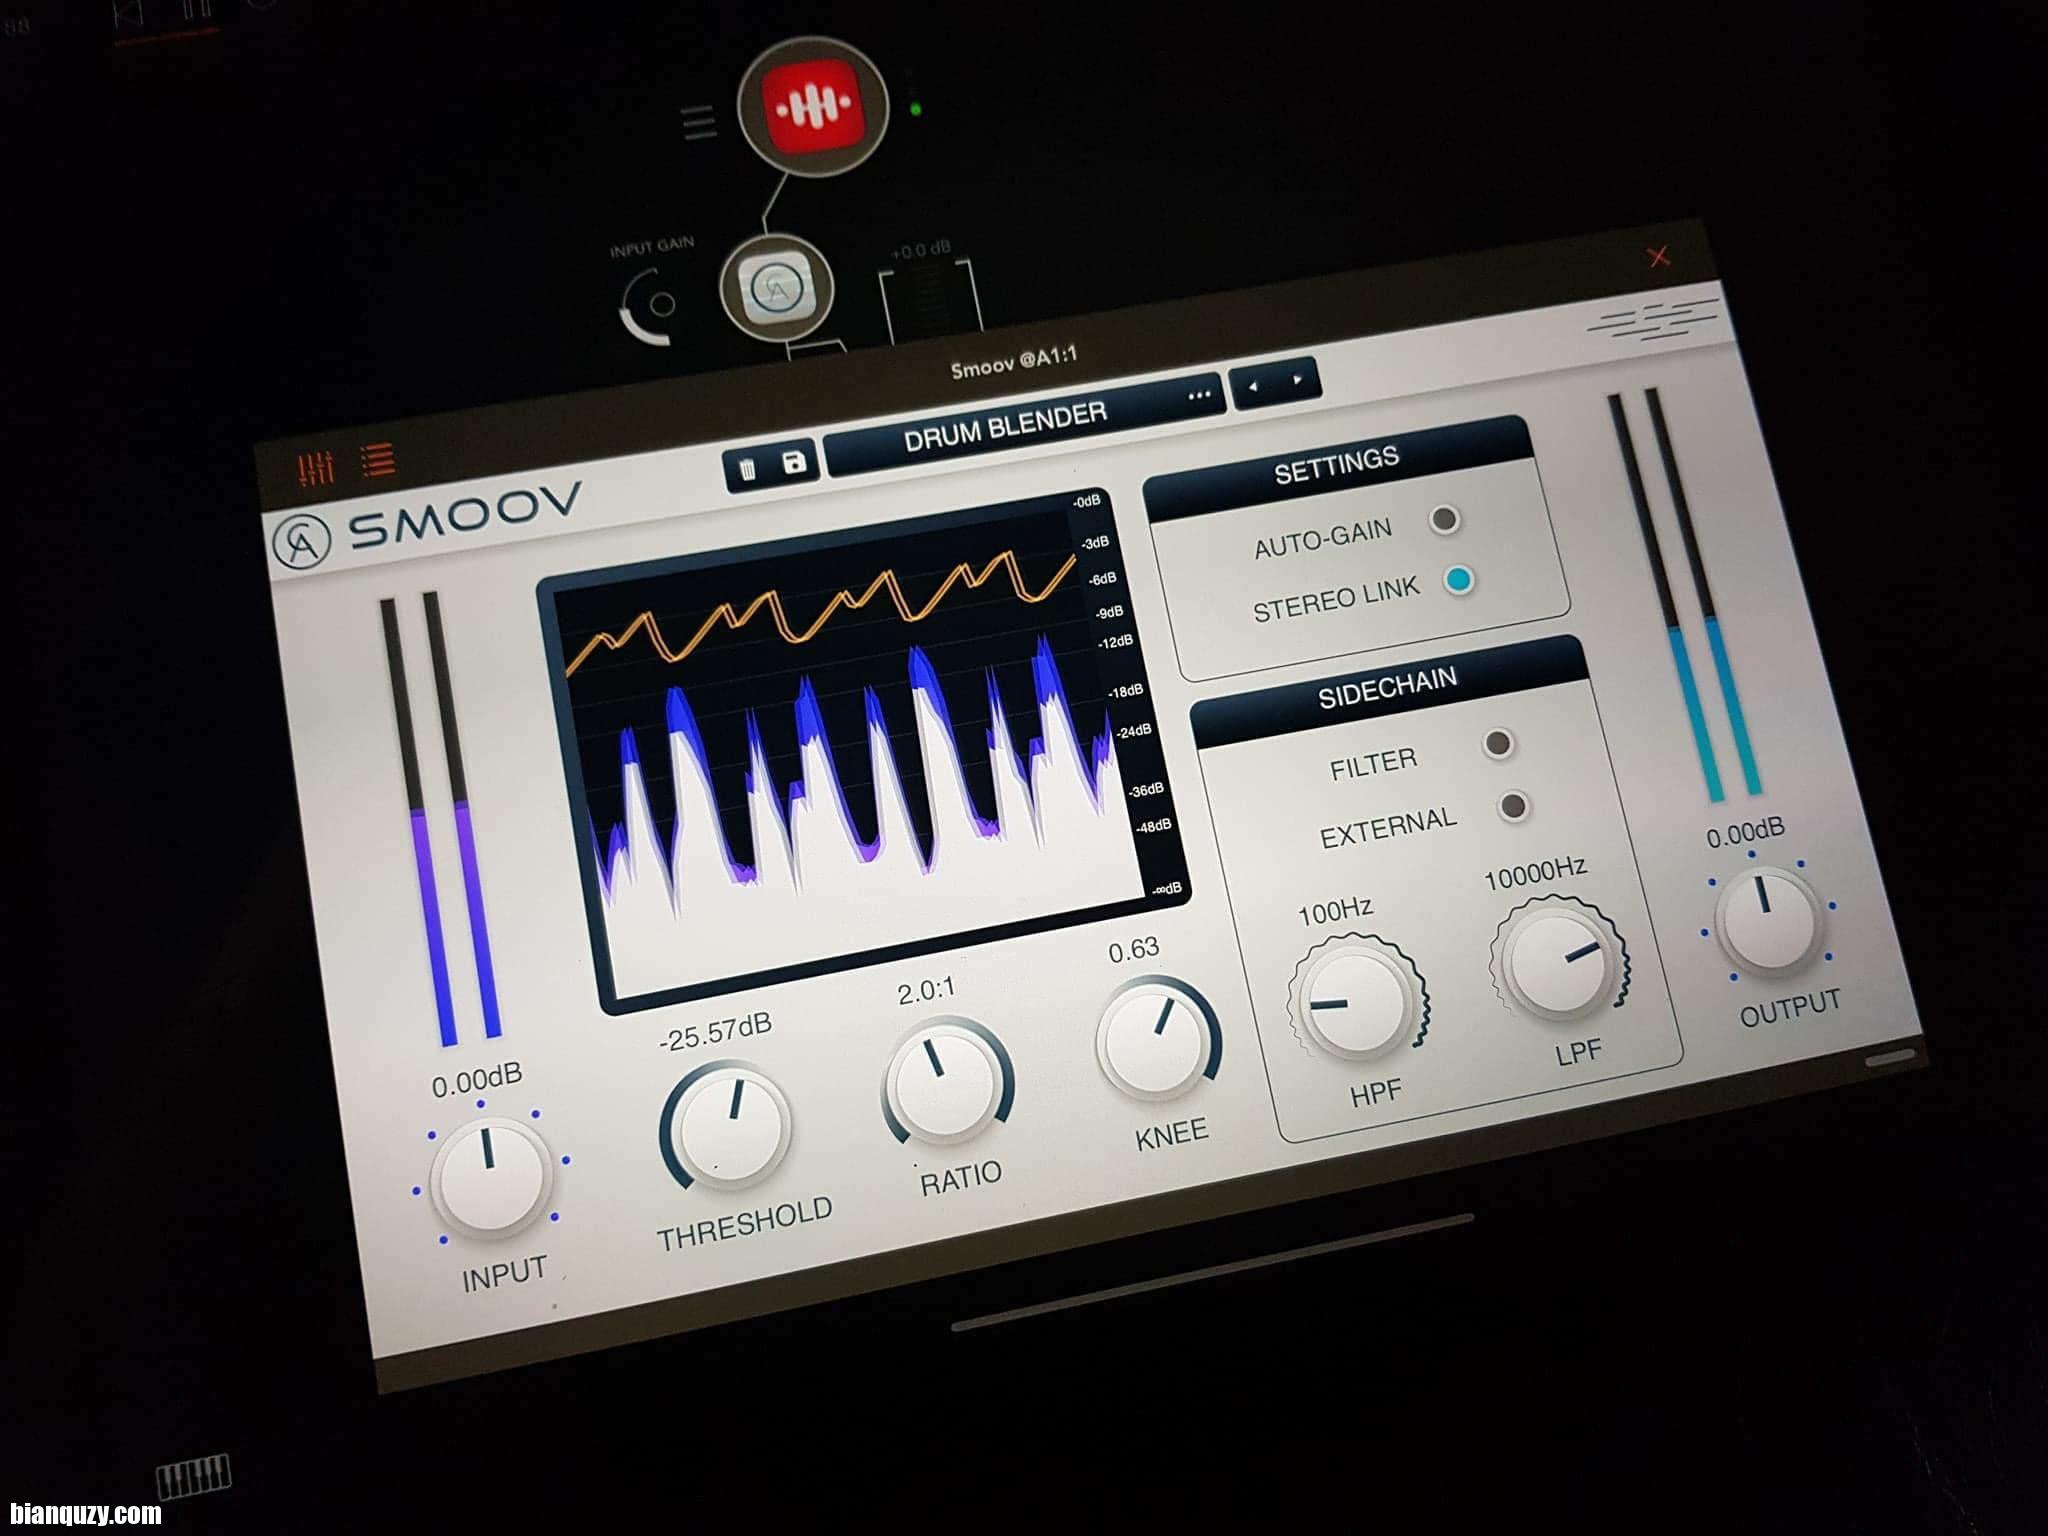 Caelum Audio Schlap 1.1.0 instal the new version for iphone